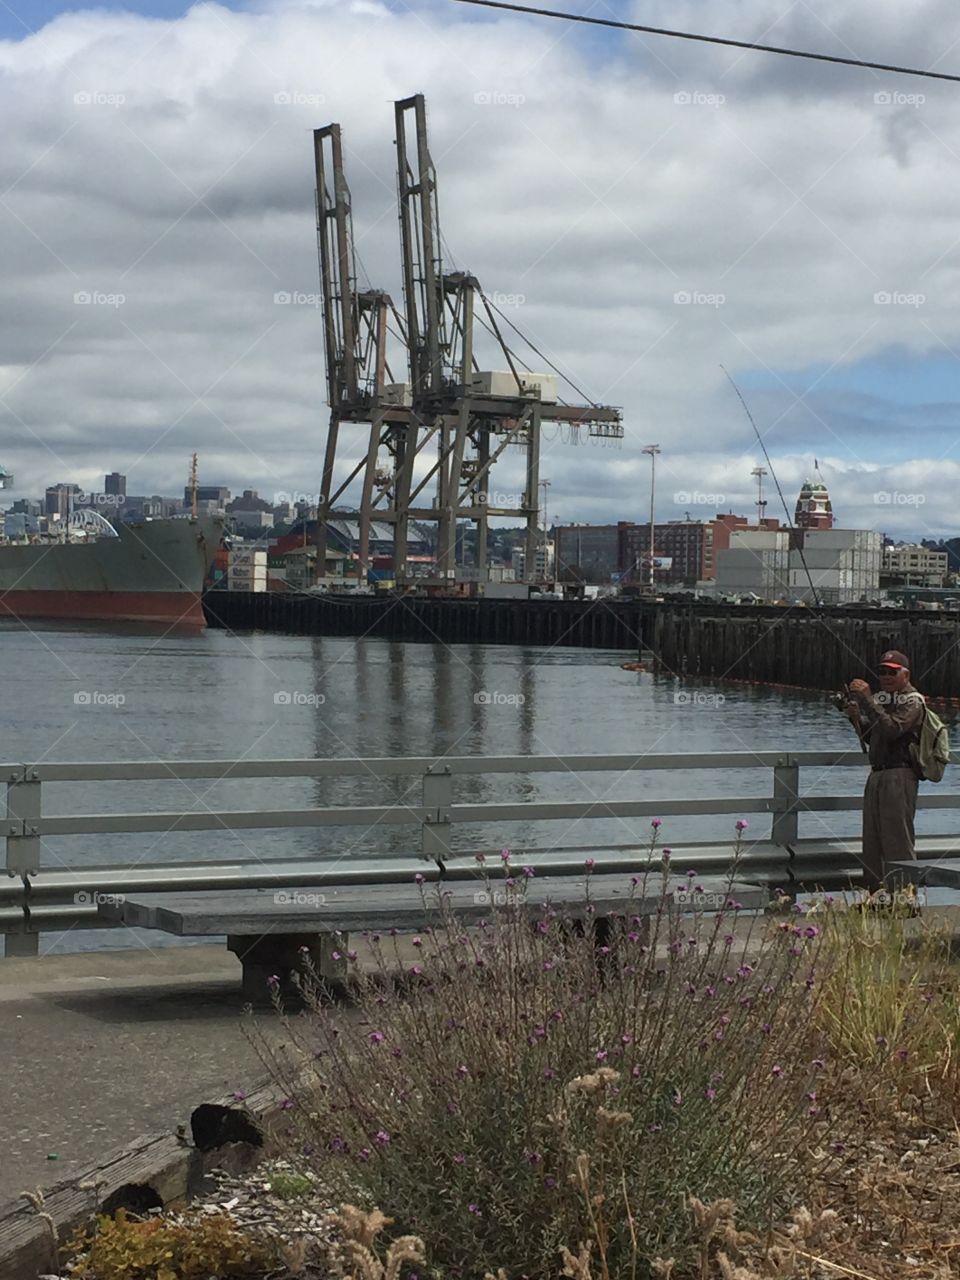 The Duwamish